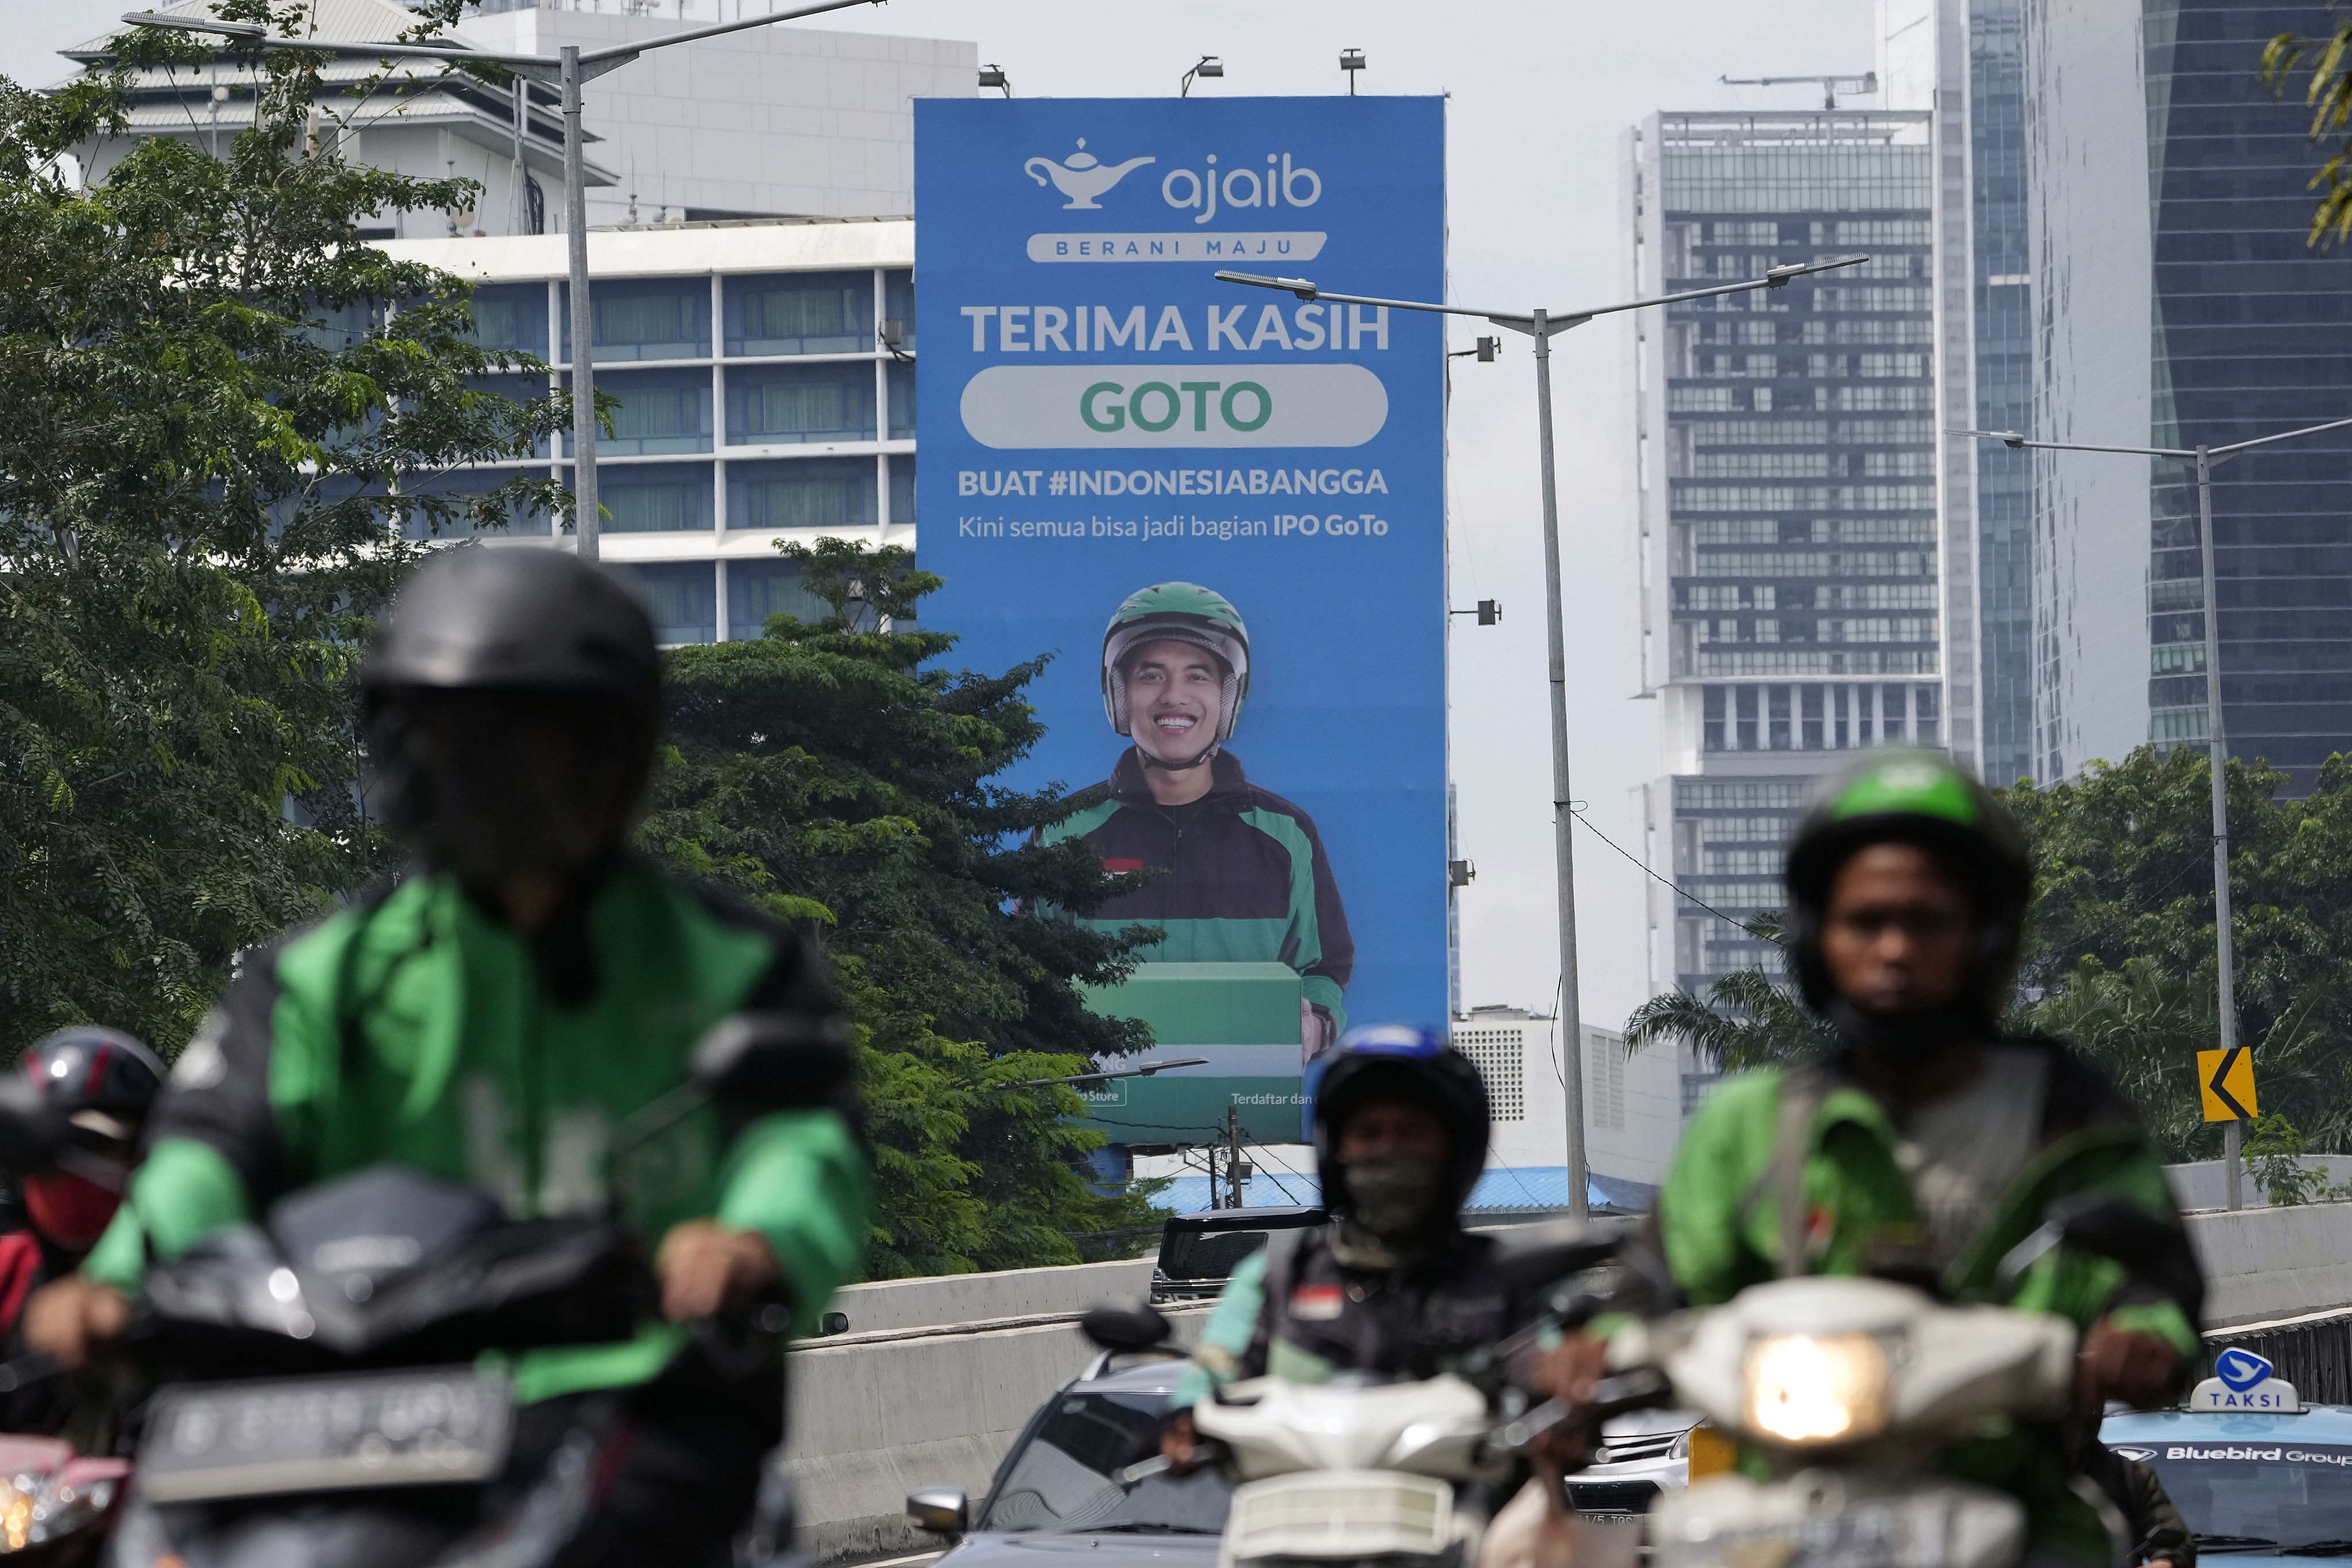 A billboard advertising GoTo’s initial public offering is displayed in Jakarta, Indonesia. GoTo was formed through the merger of Gojek and Tokopedia. Photo: Bloomberg